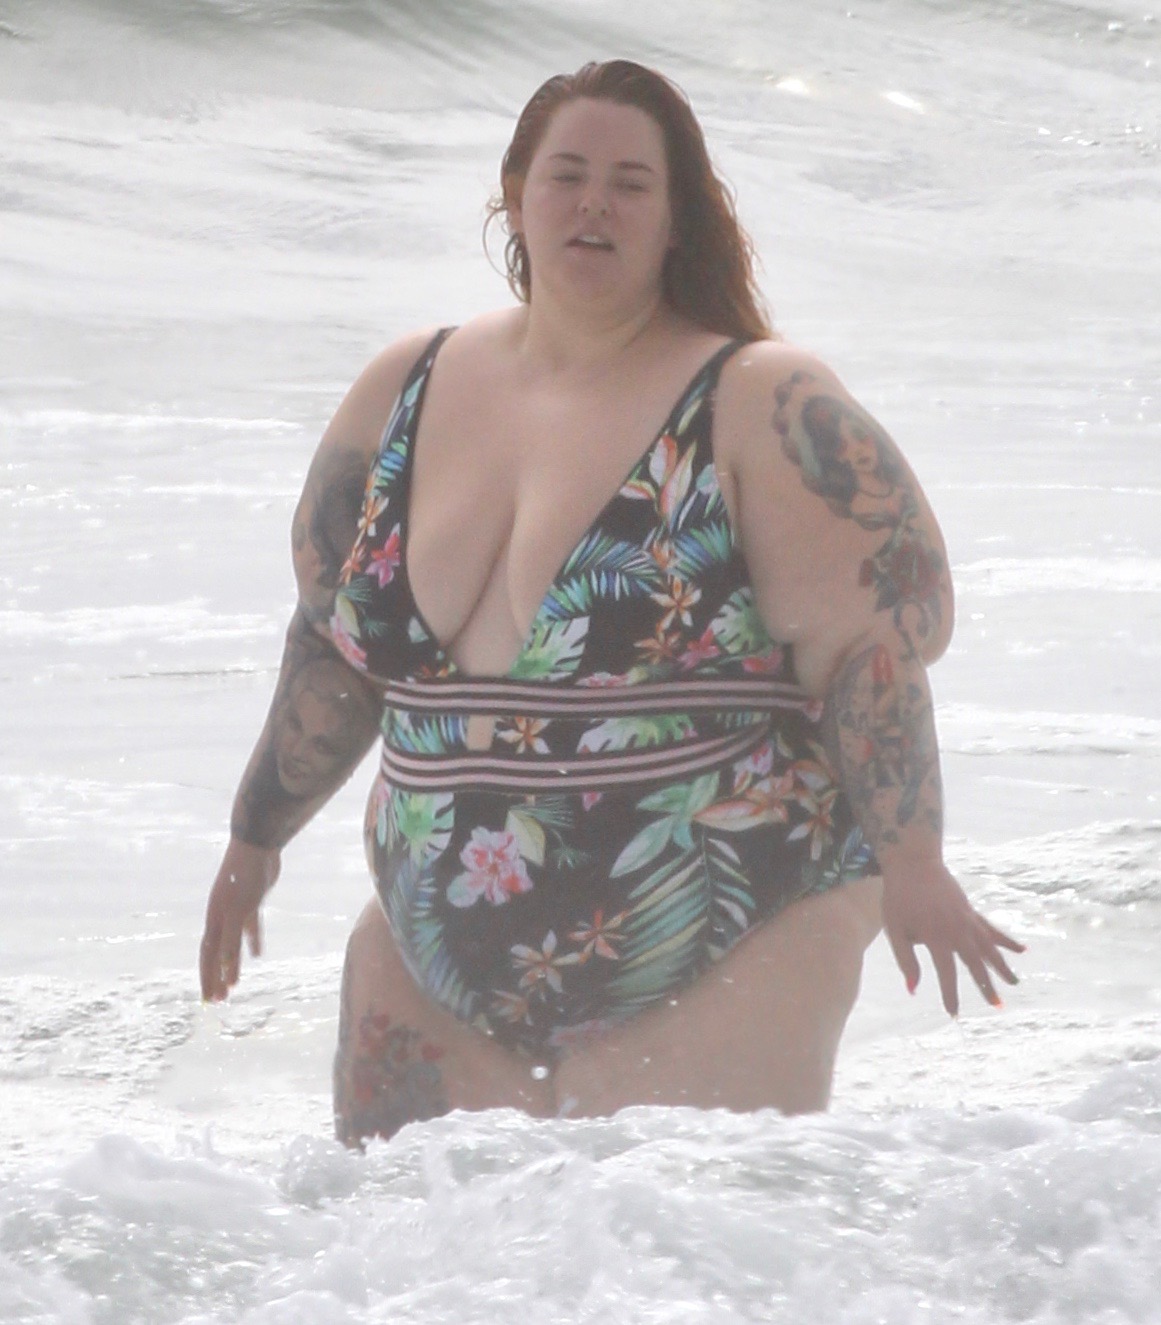 Tess Holliday Rocks Swimsuit: Photos of the Models Floral 1-Piece